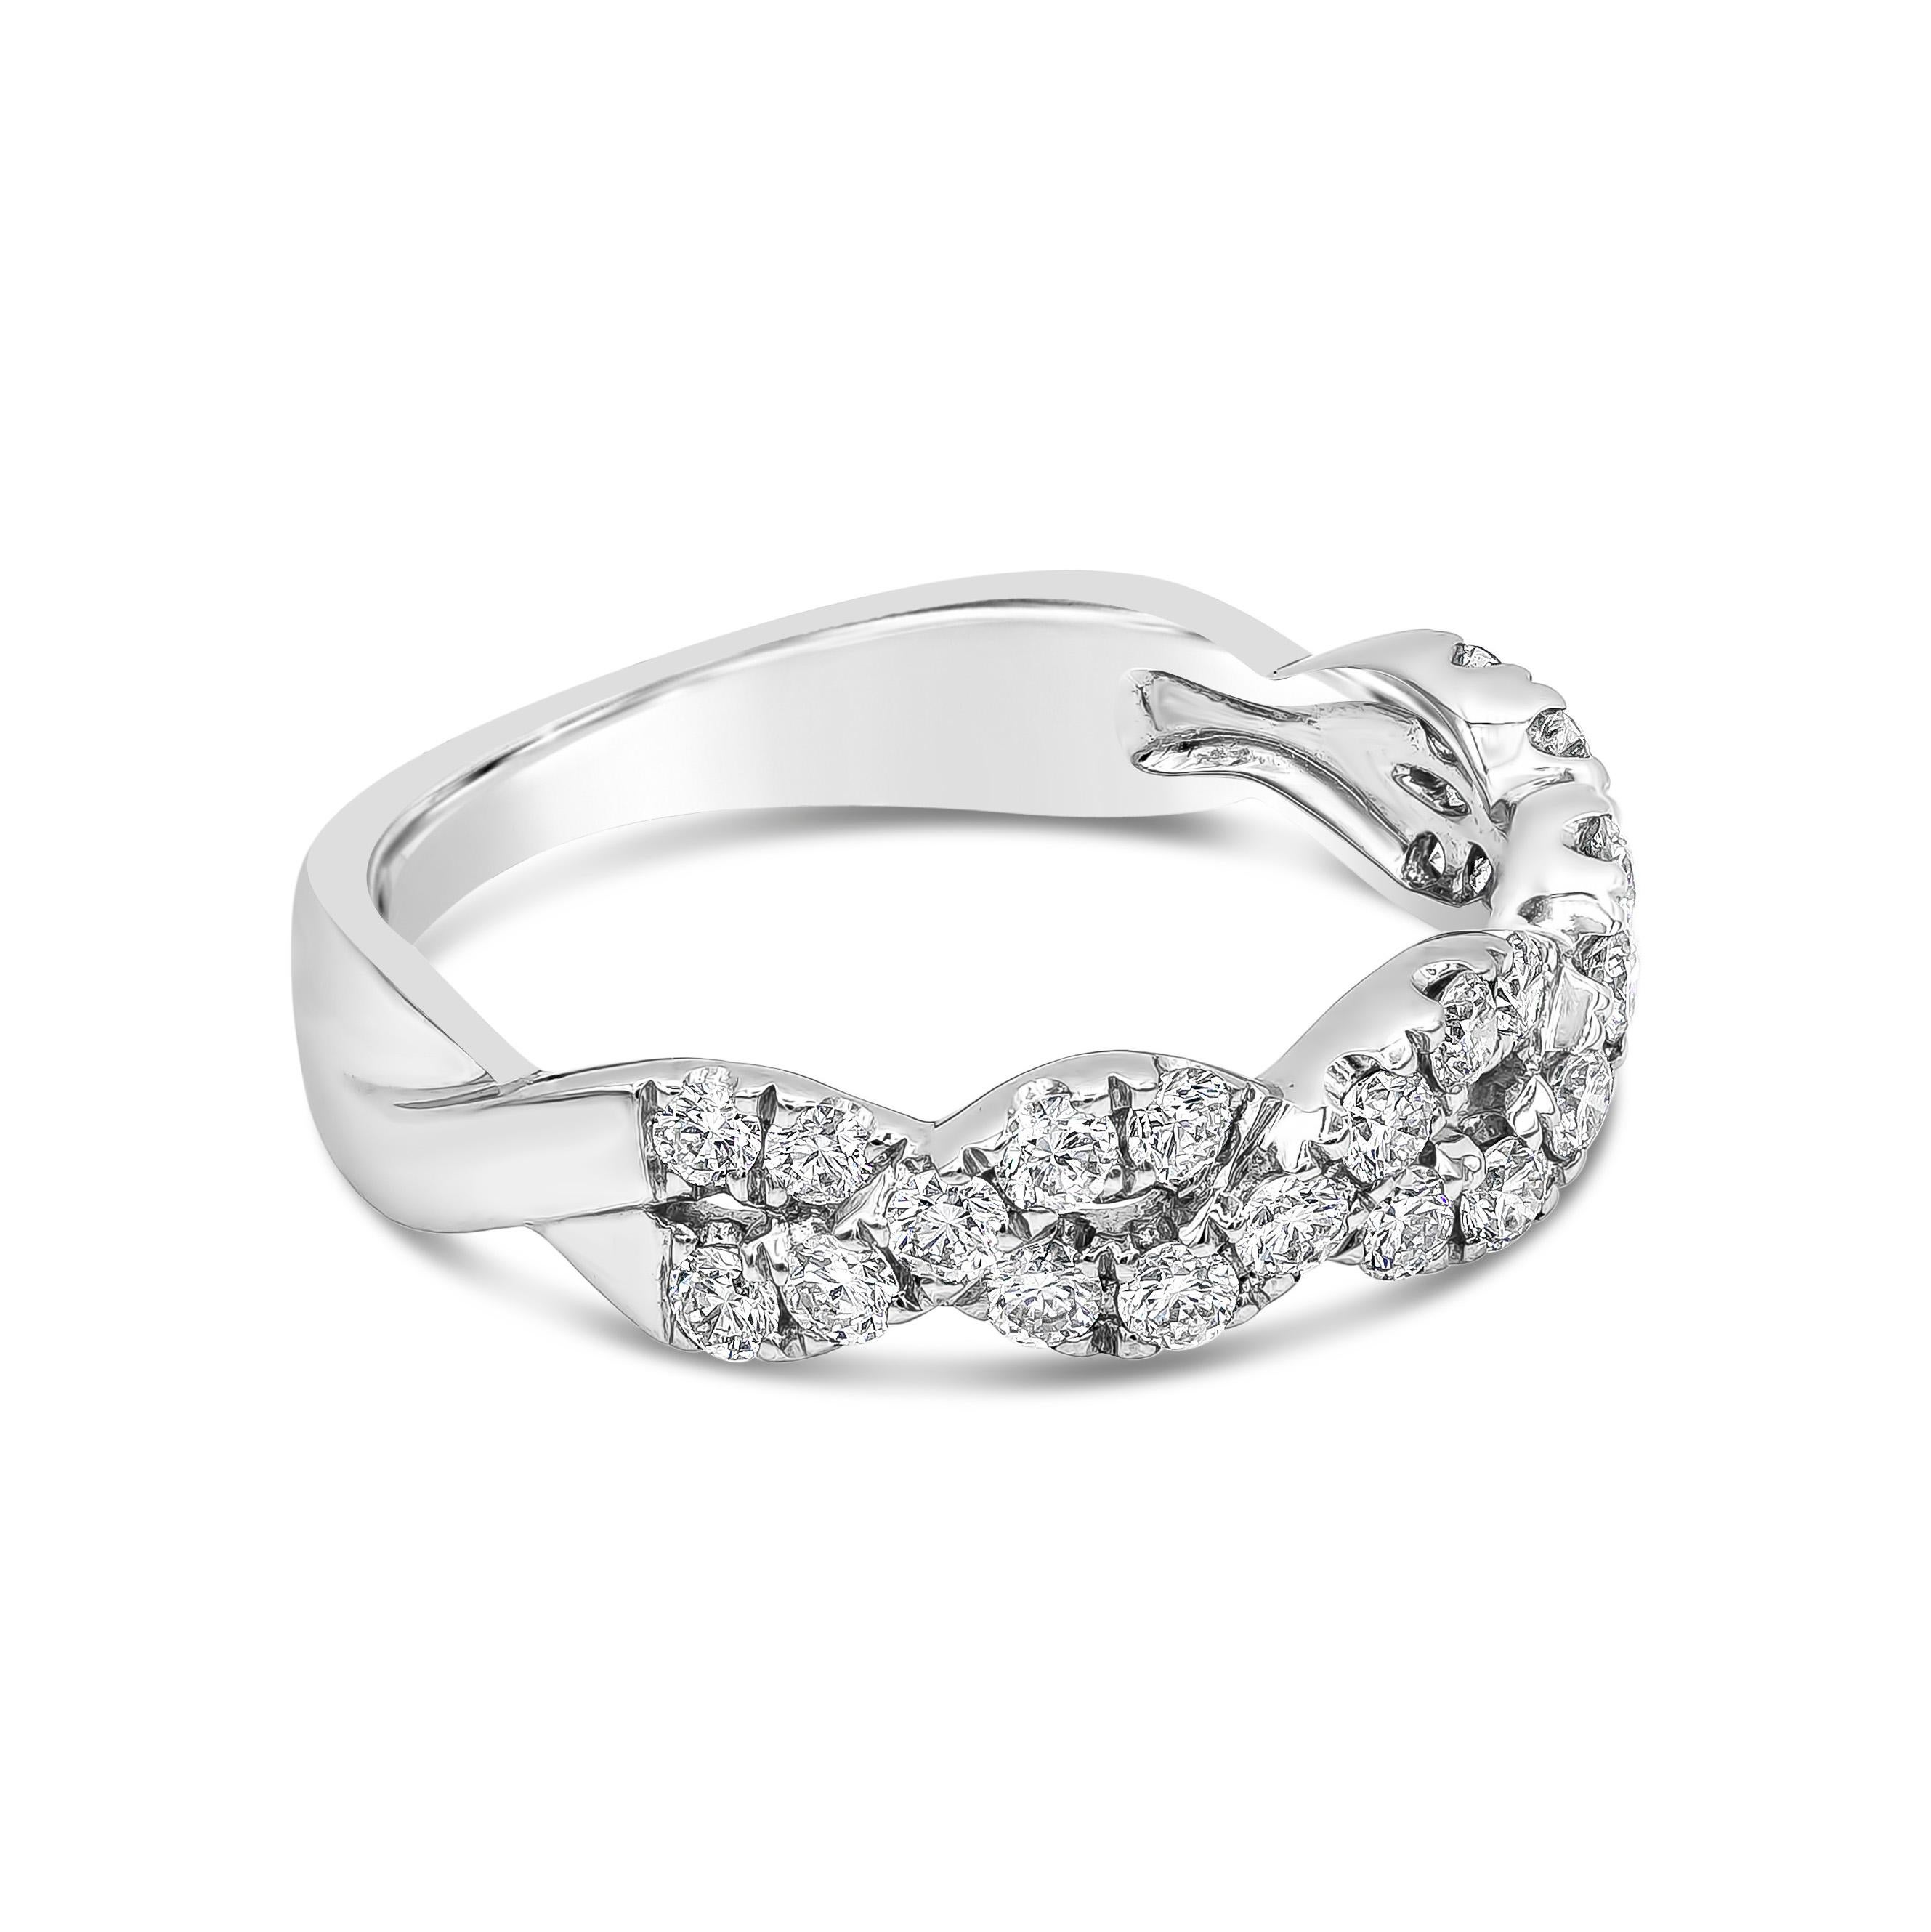 This unique take on the classic diamond wedding band features 0.62 carats total brilliant round diamonds set in 18k white gold. Two lines of sparkling diamonds intertwine to symbolize the infinite love between two people. Size 6.75 US resizable upon